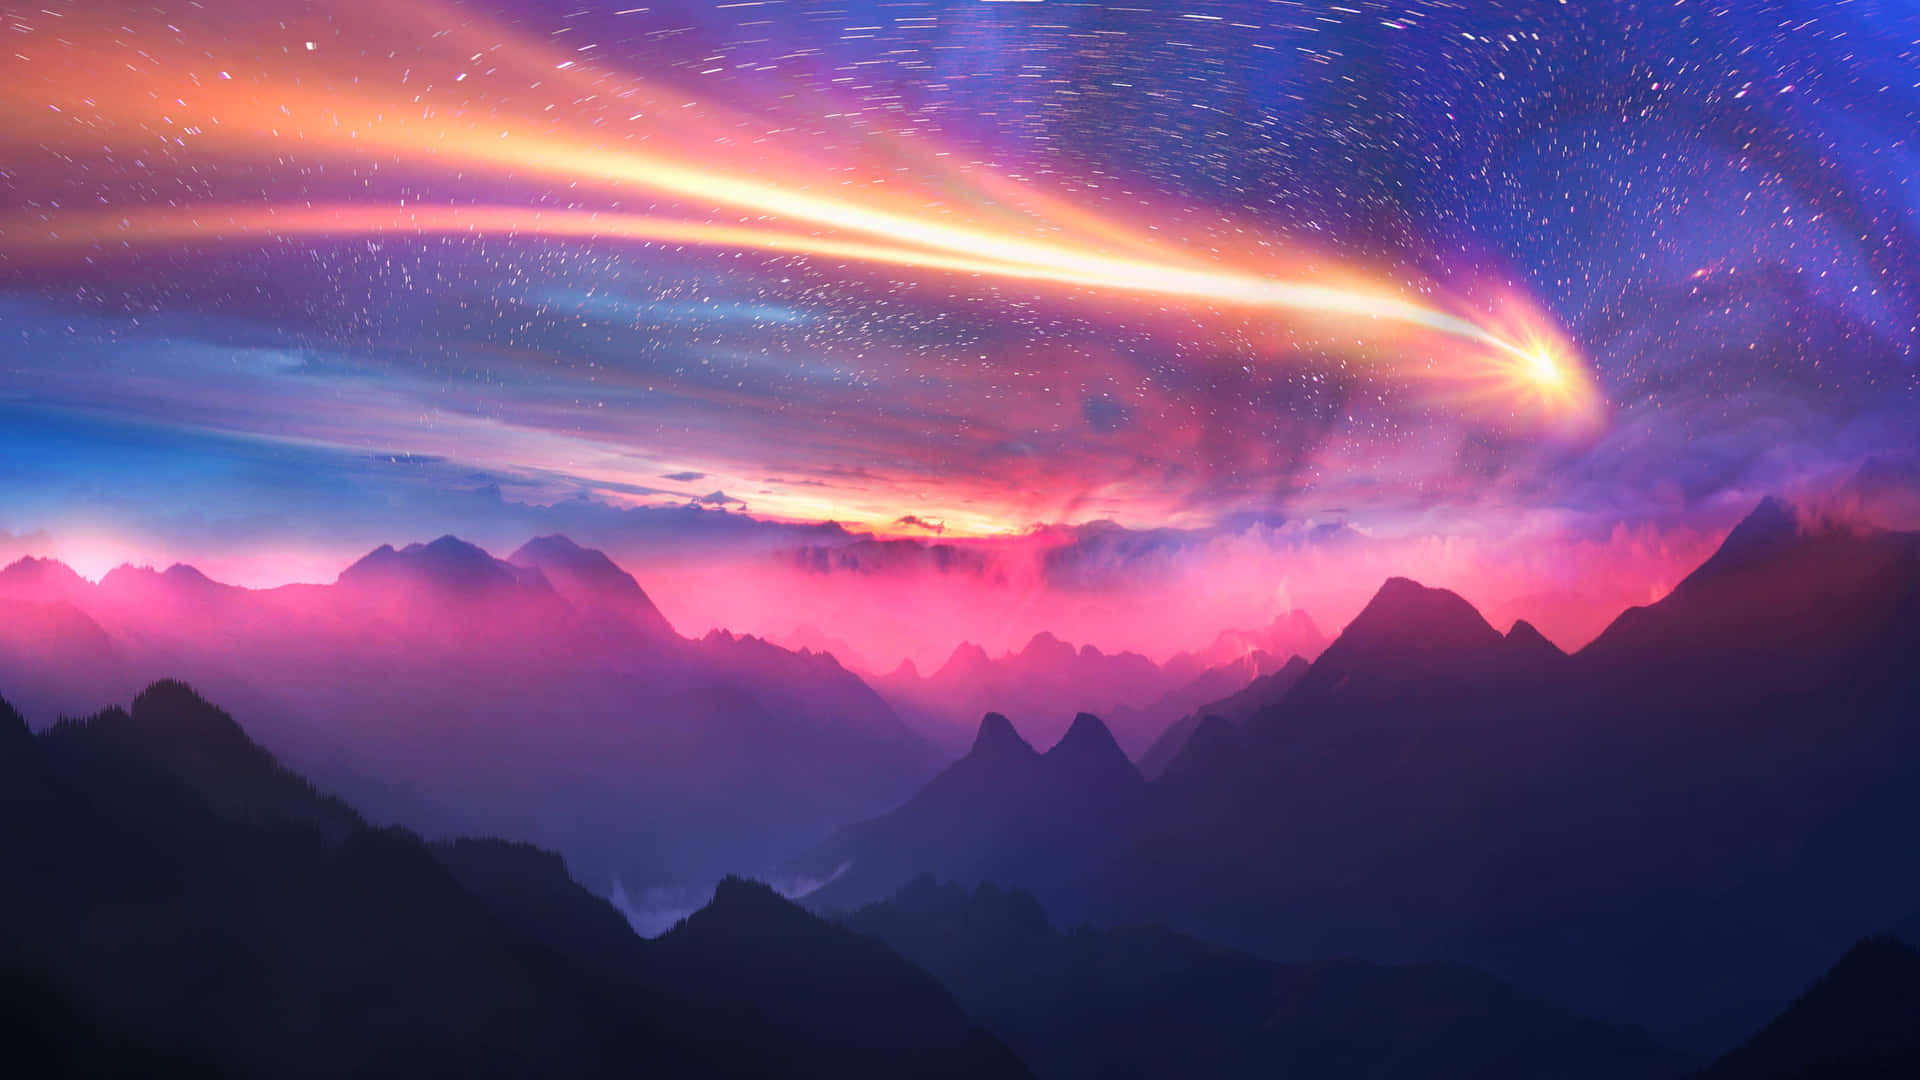 A Colorful Sky With A Star In The Sky